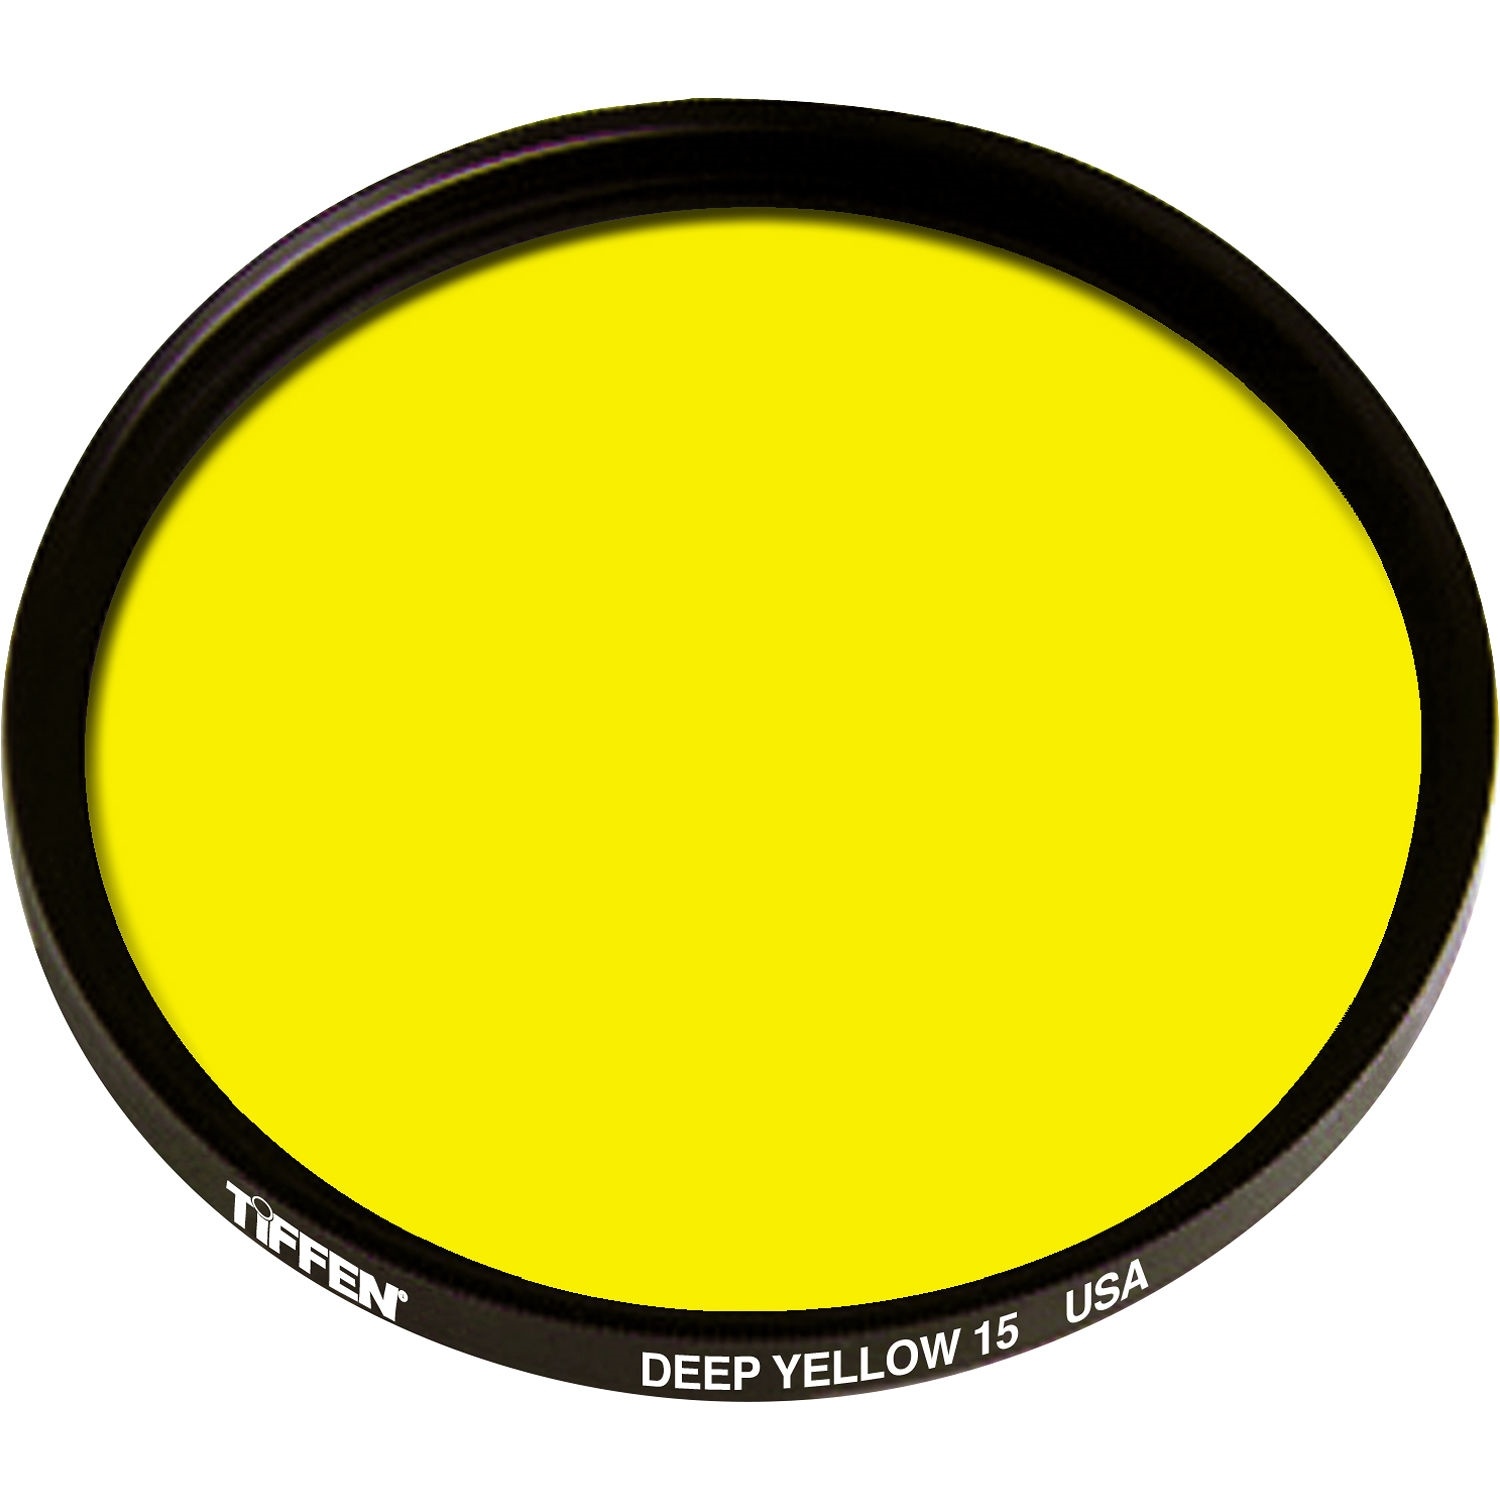 Tiffen 46mm Deep Yellow 15 Glass Filter for Black & White Film